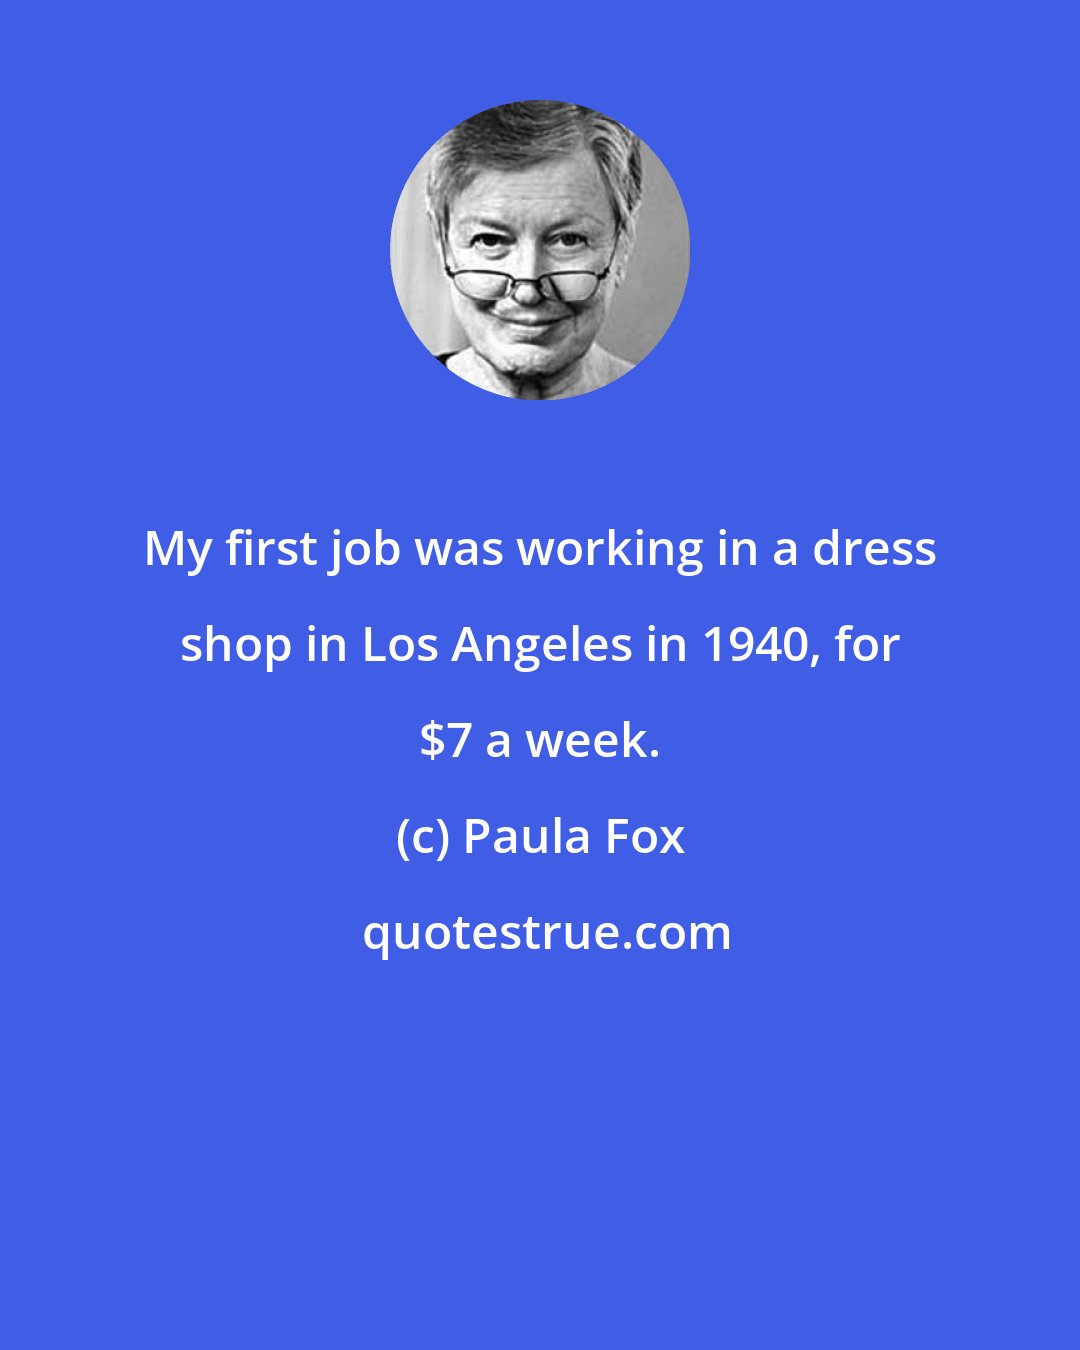 Paula Fox: My first job was working in a dress shop in Los Angeles in 1940, for $7 a week.